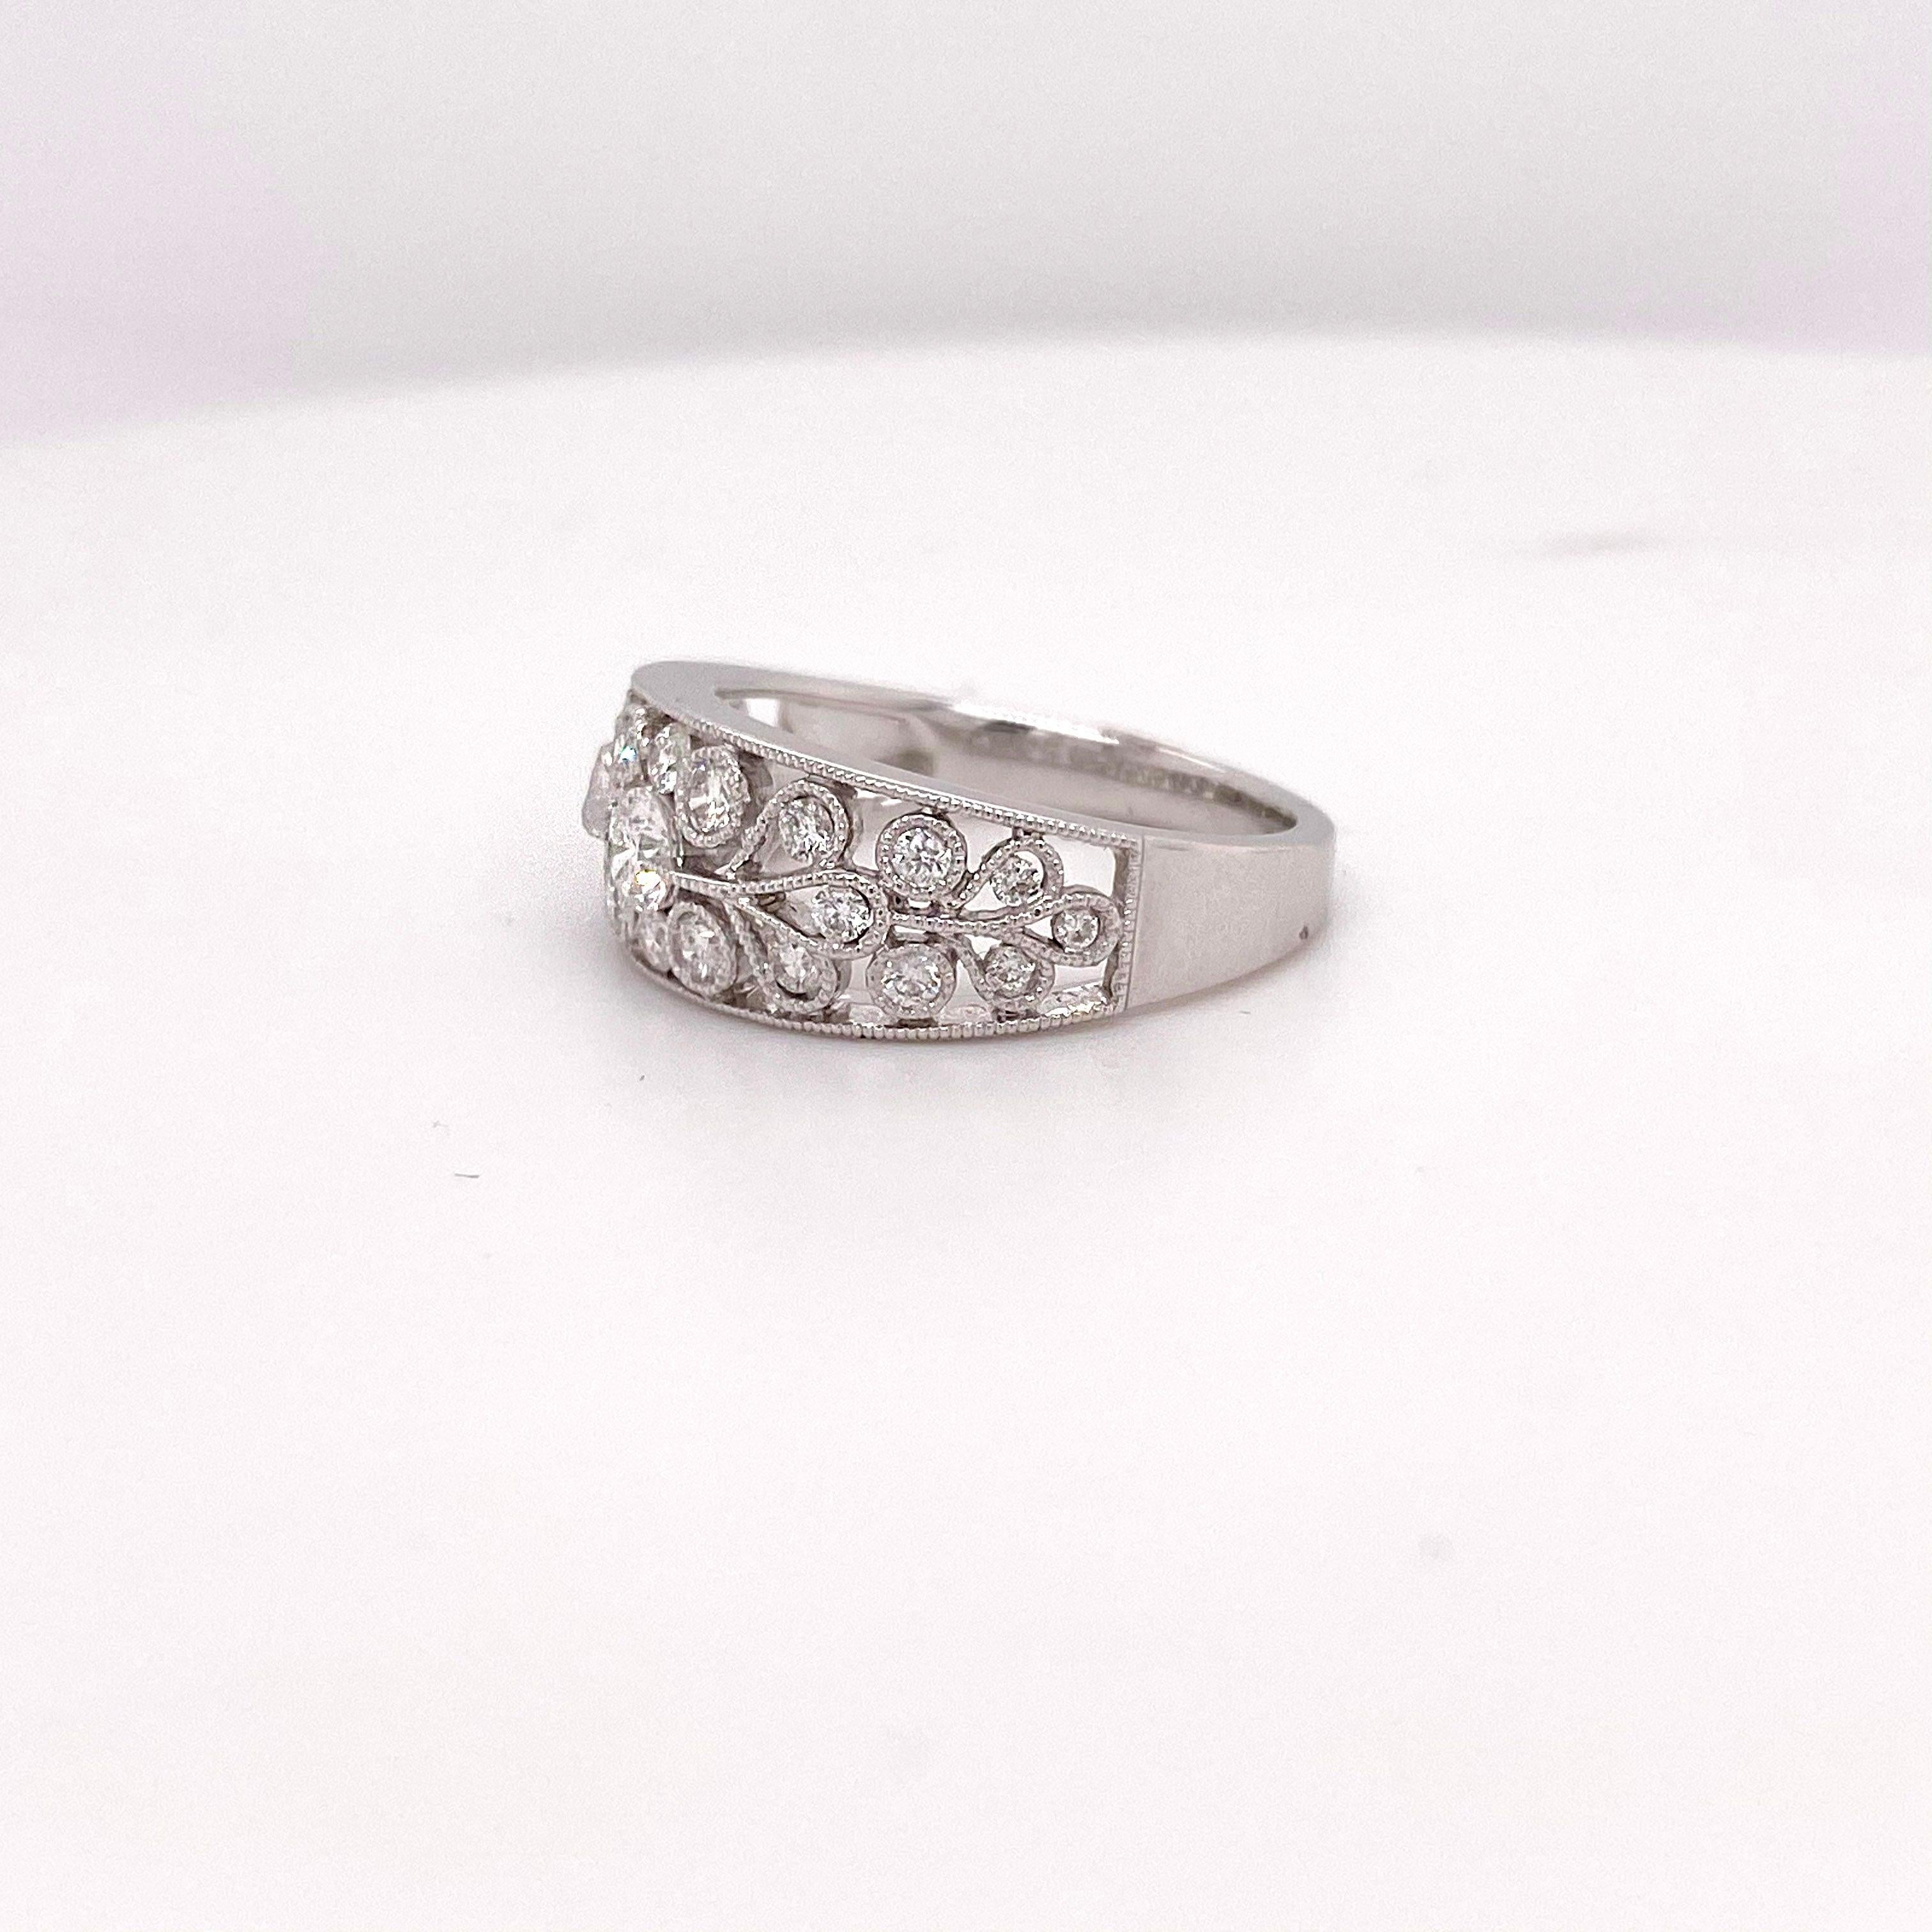 For Sale:  Tapered Wide Diamond Band, White Gold with 23 Diamonds .59 Carat Low Profile 3